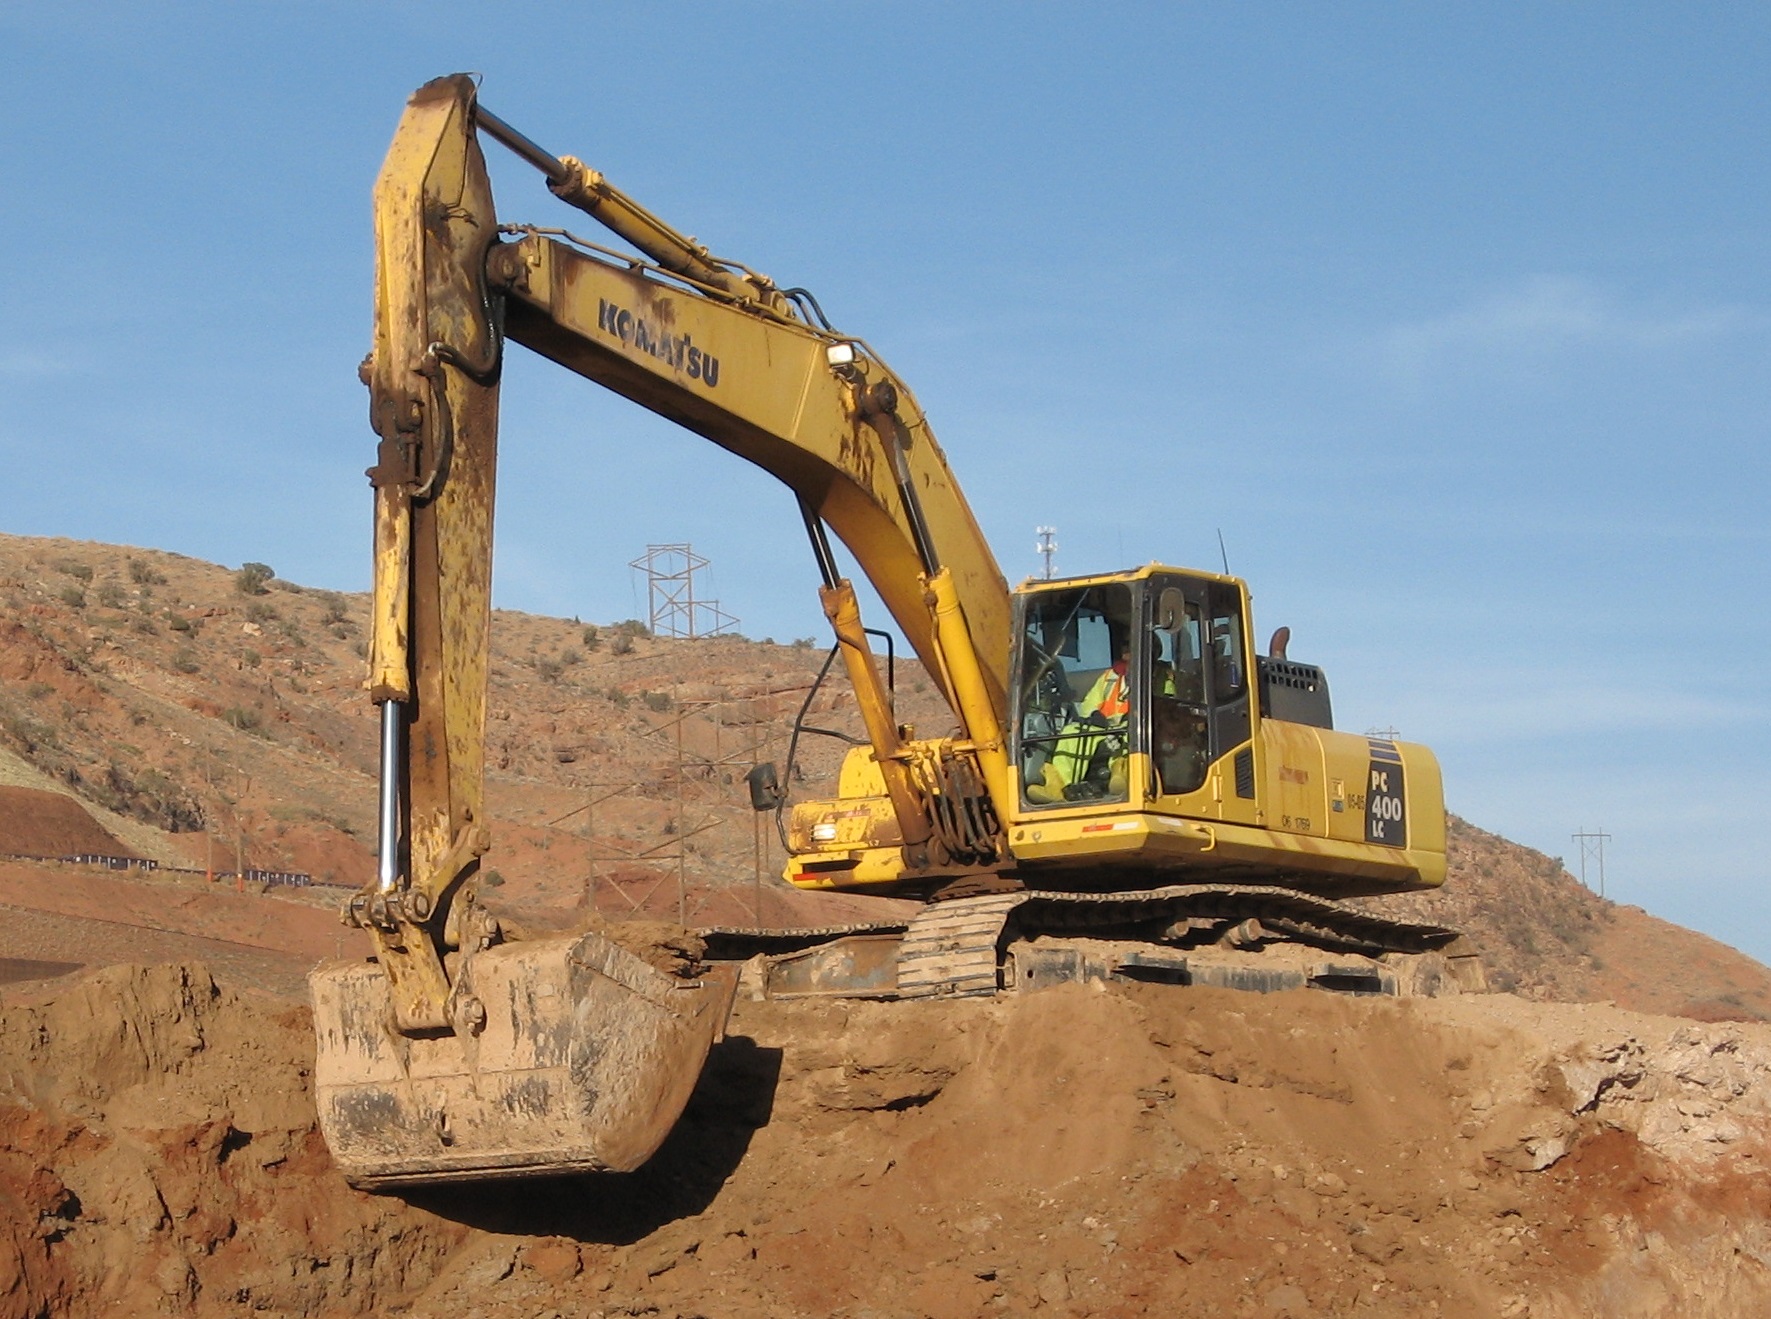 An excavator removes contaminants at a project site.